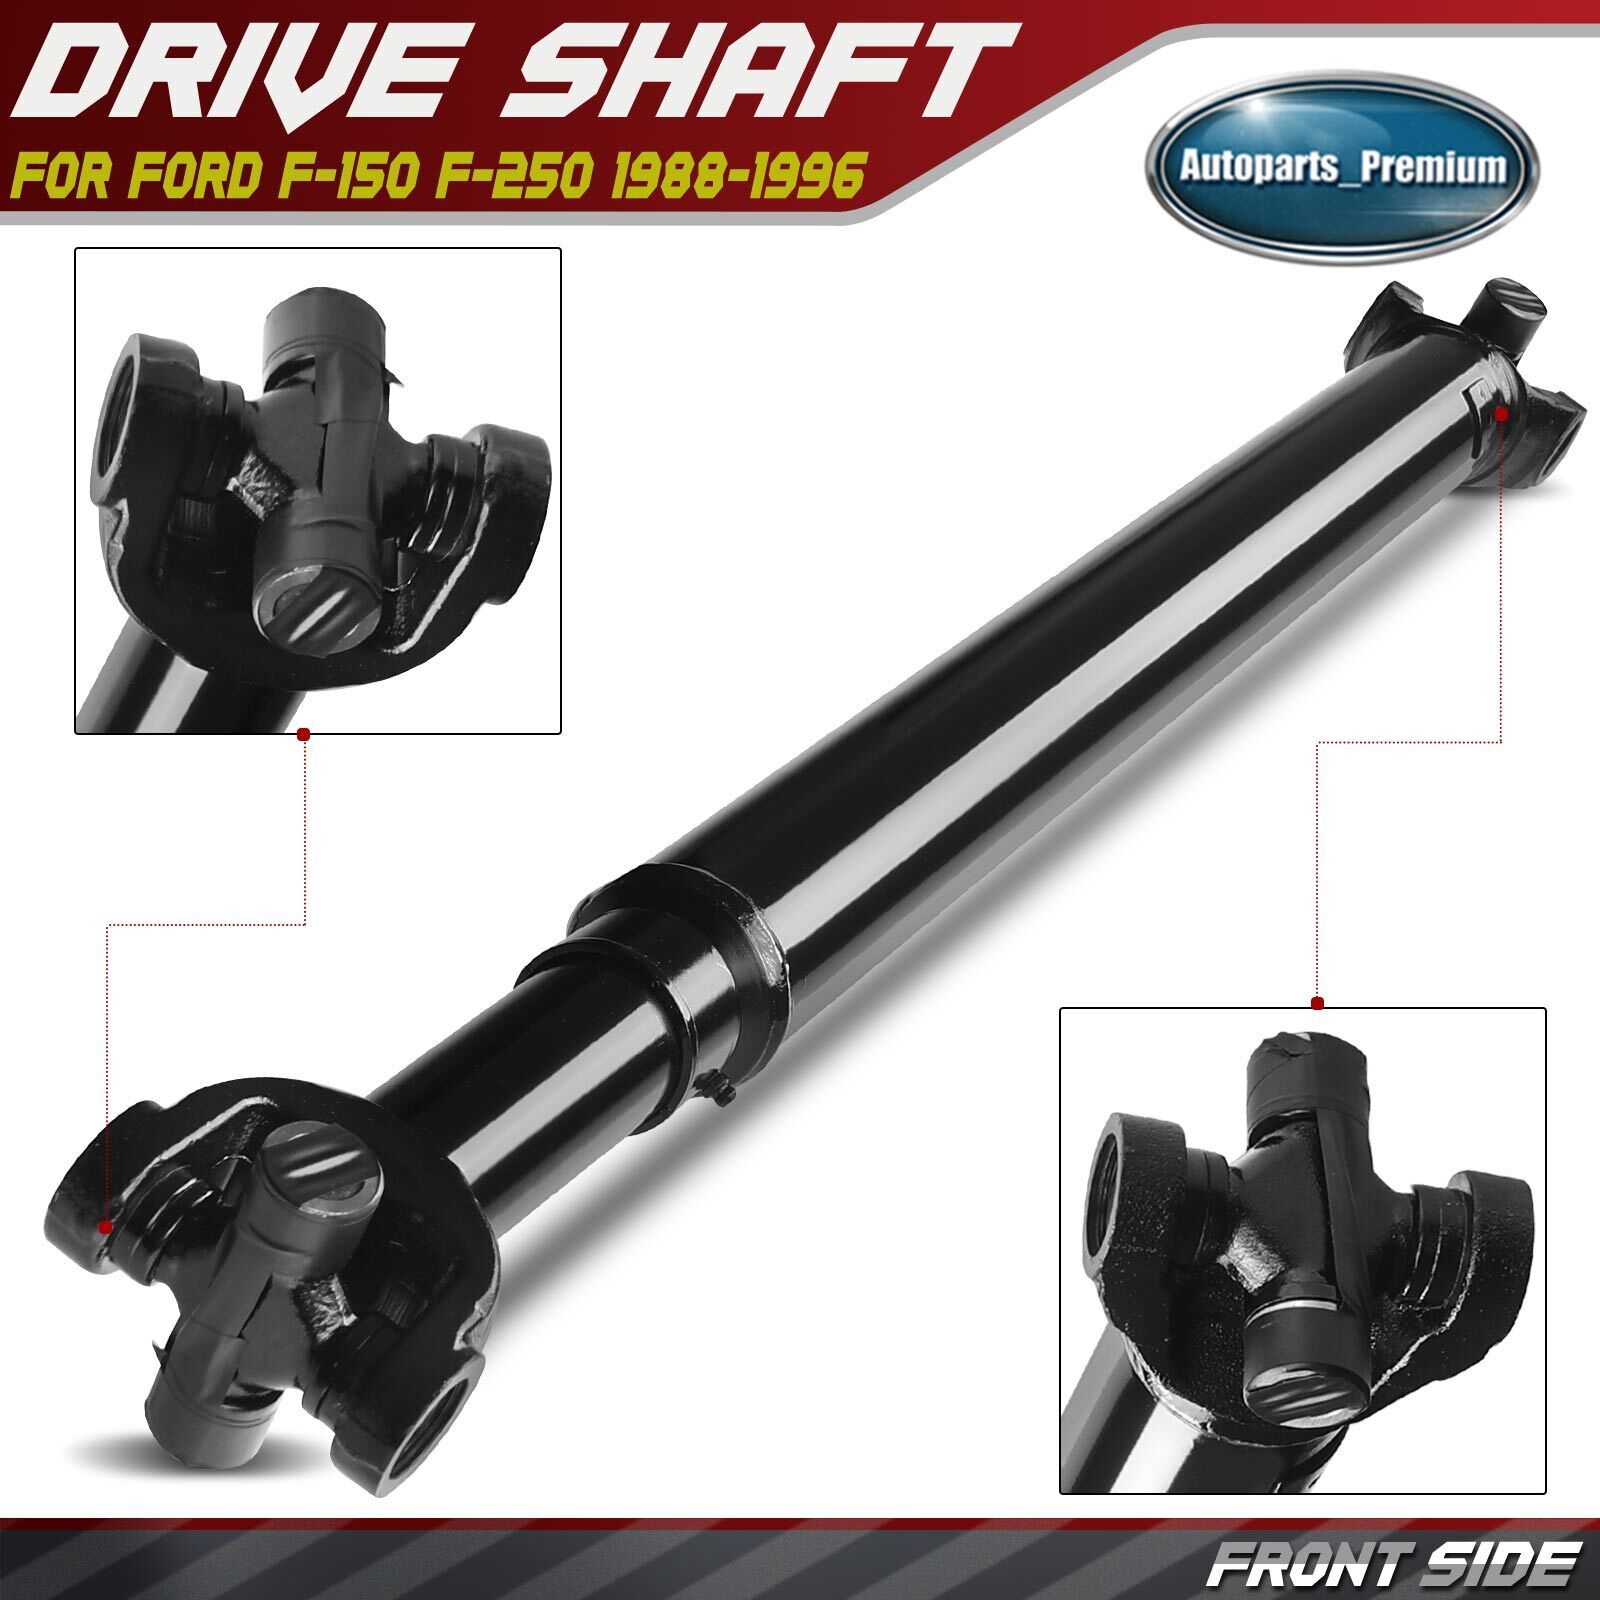 Front Drive Shaft Assembly for Ford F-150 F250 Bronco 1988-1996 4WD Manual trans